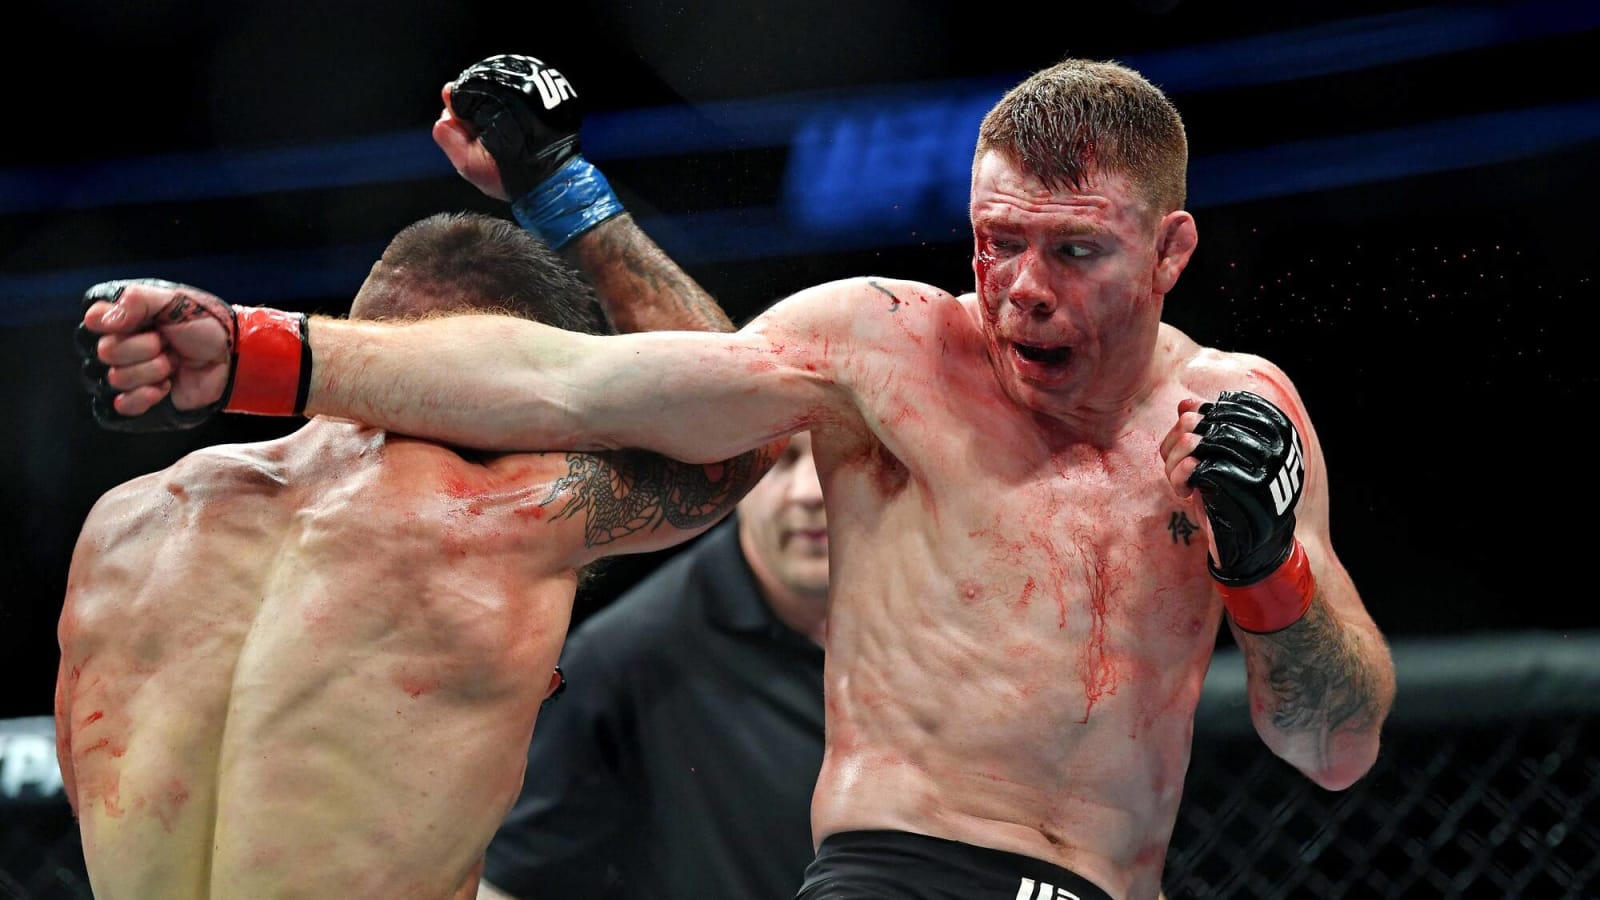 Paul Felder Reveals Opponent He Does Not Want To Fight In UFC Return